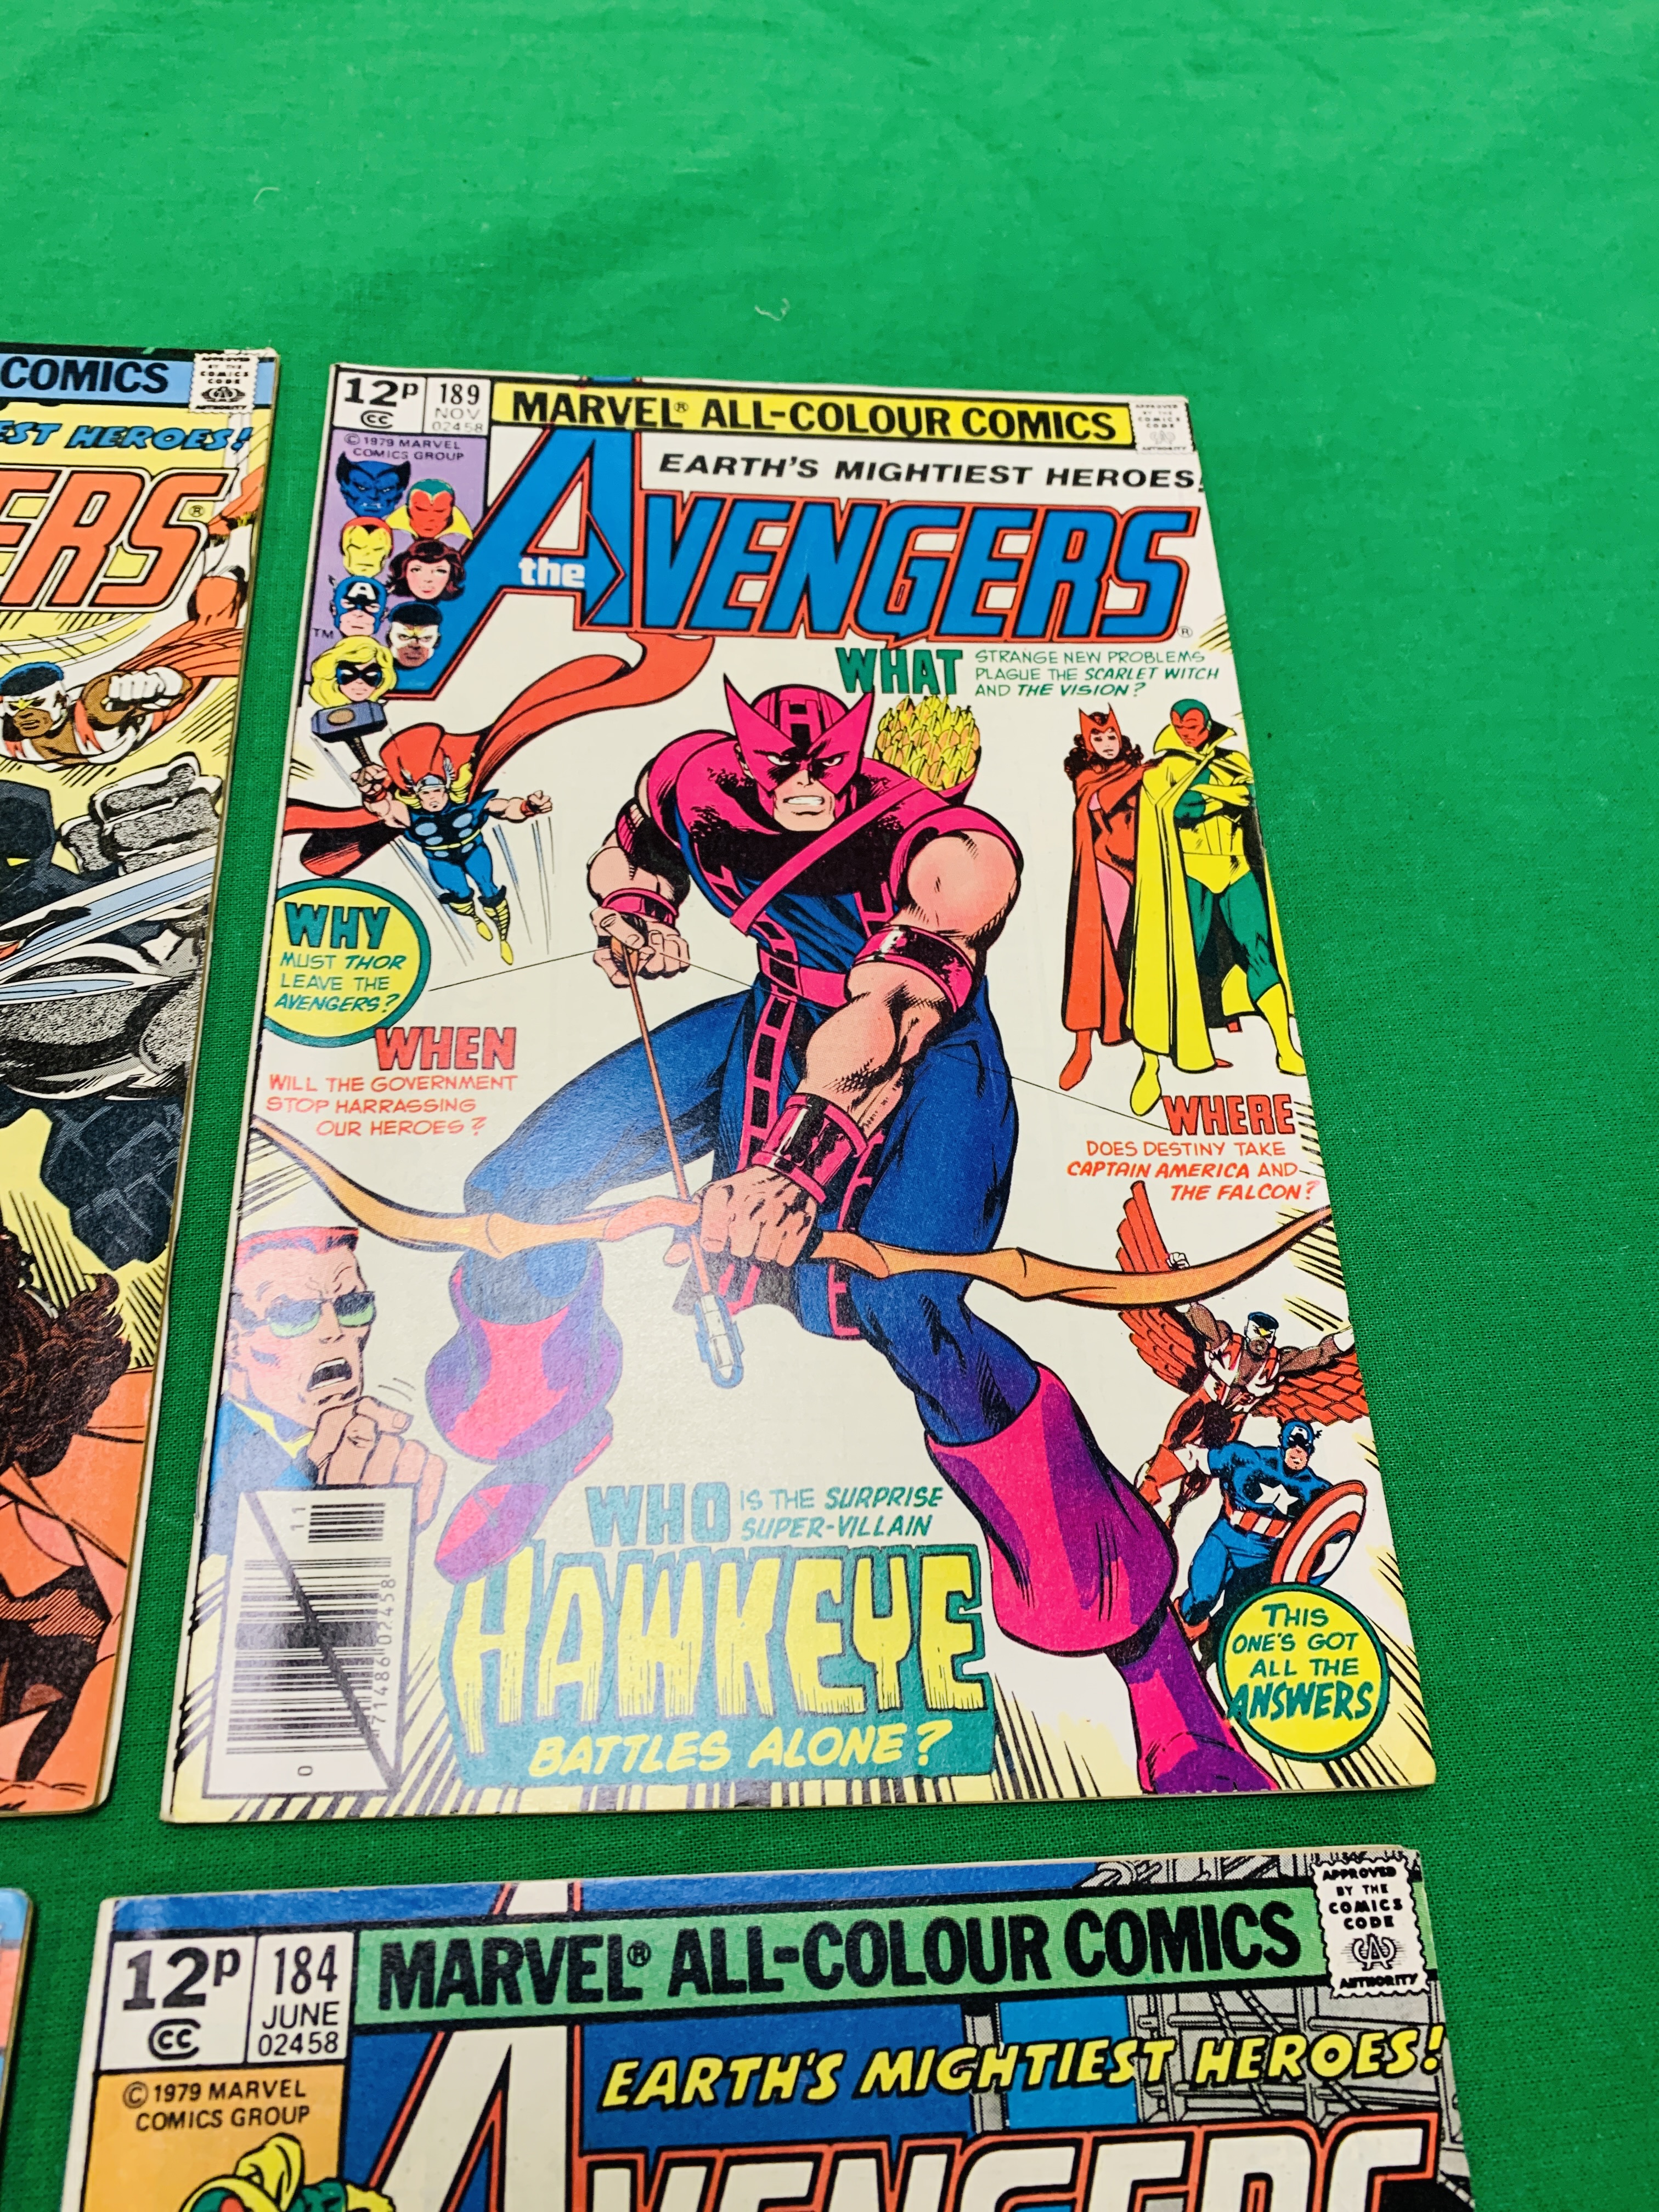 MARVEL COMICS THE AVENGERS NO. 101 - 299, MISSING ISSUES 103 AND 110. - Image 64 of 130